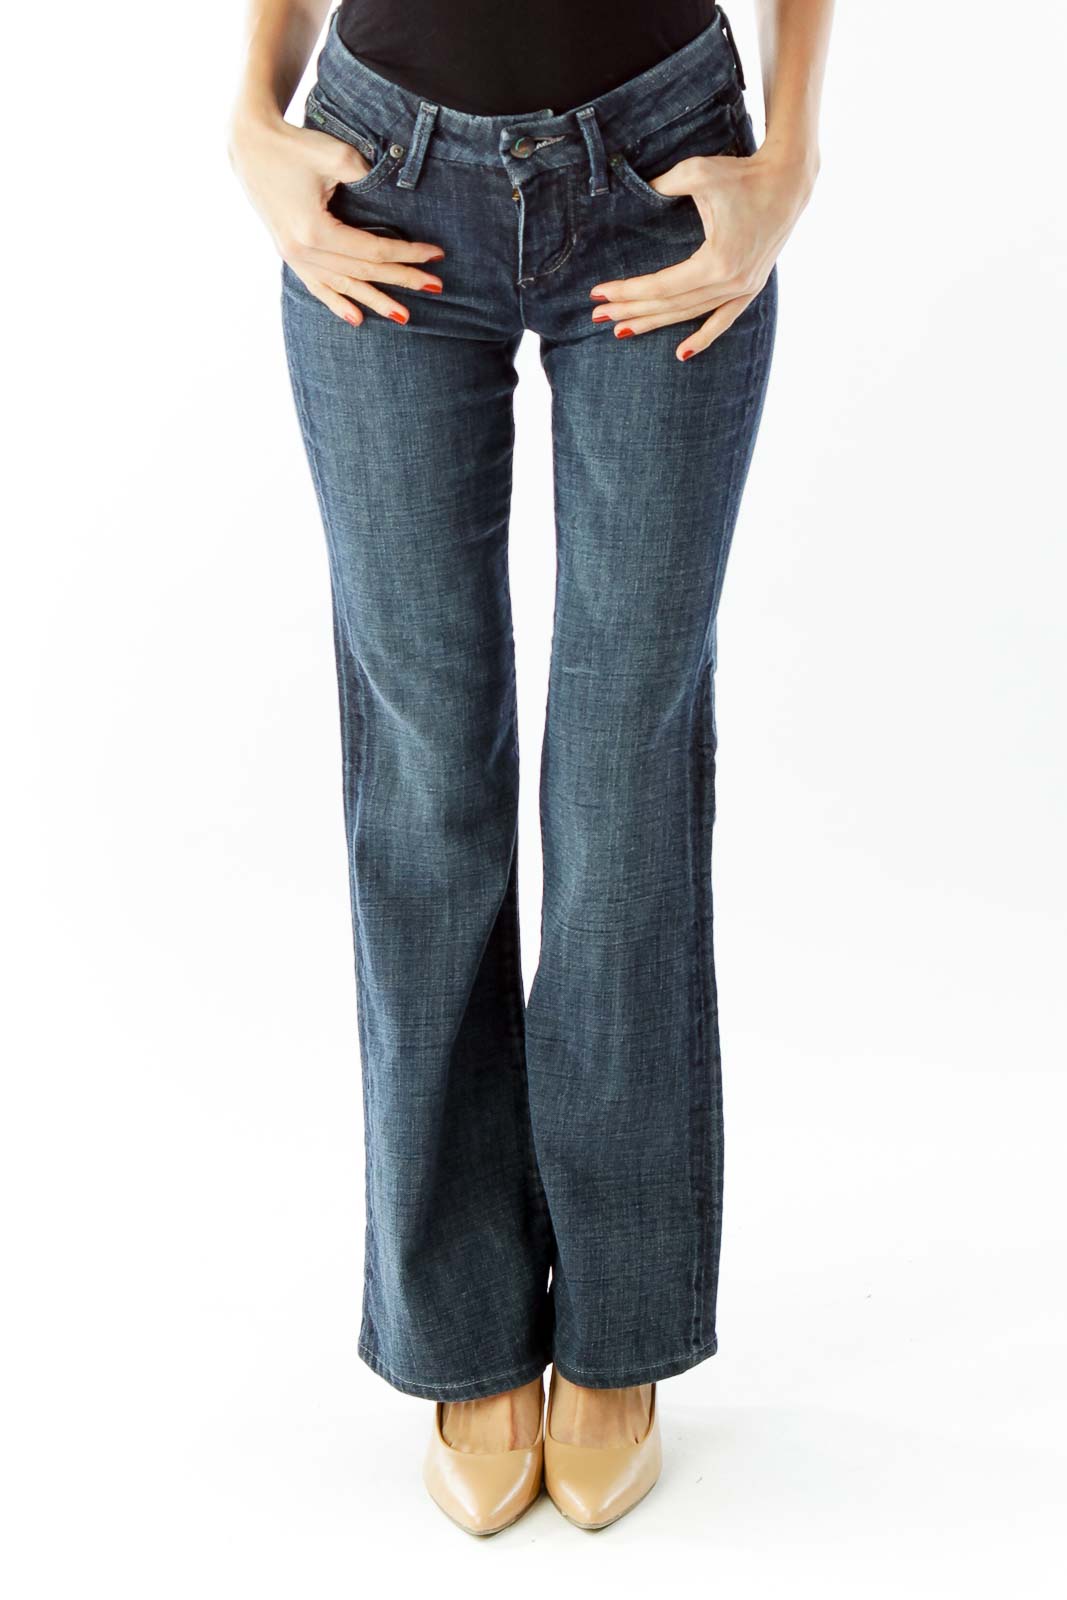 Navy High-Waisted Flared Jeans Front